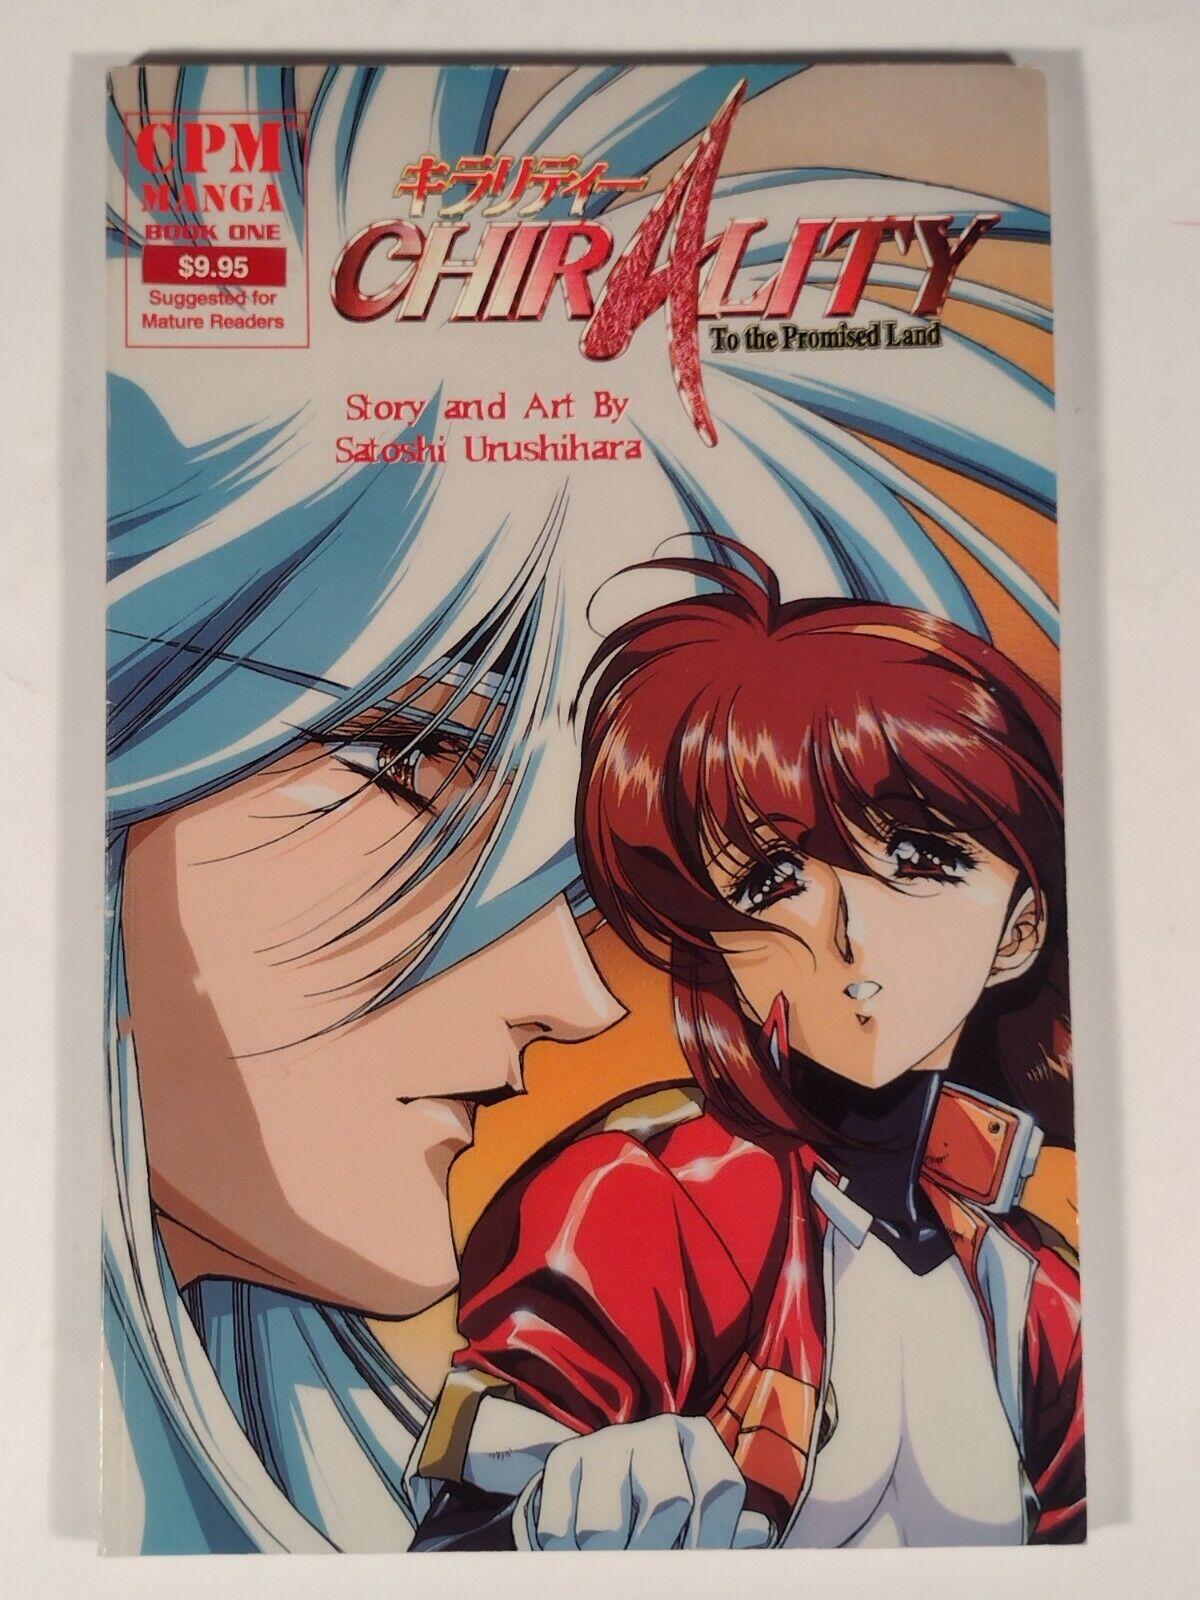 Chirality Book One - To The Promised Land - TPB GN - CPM Manga 1997